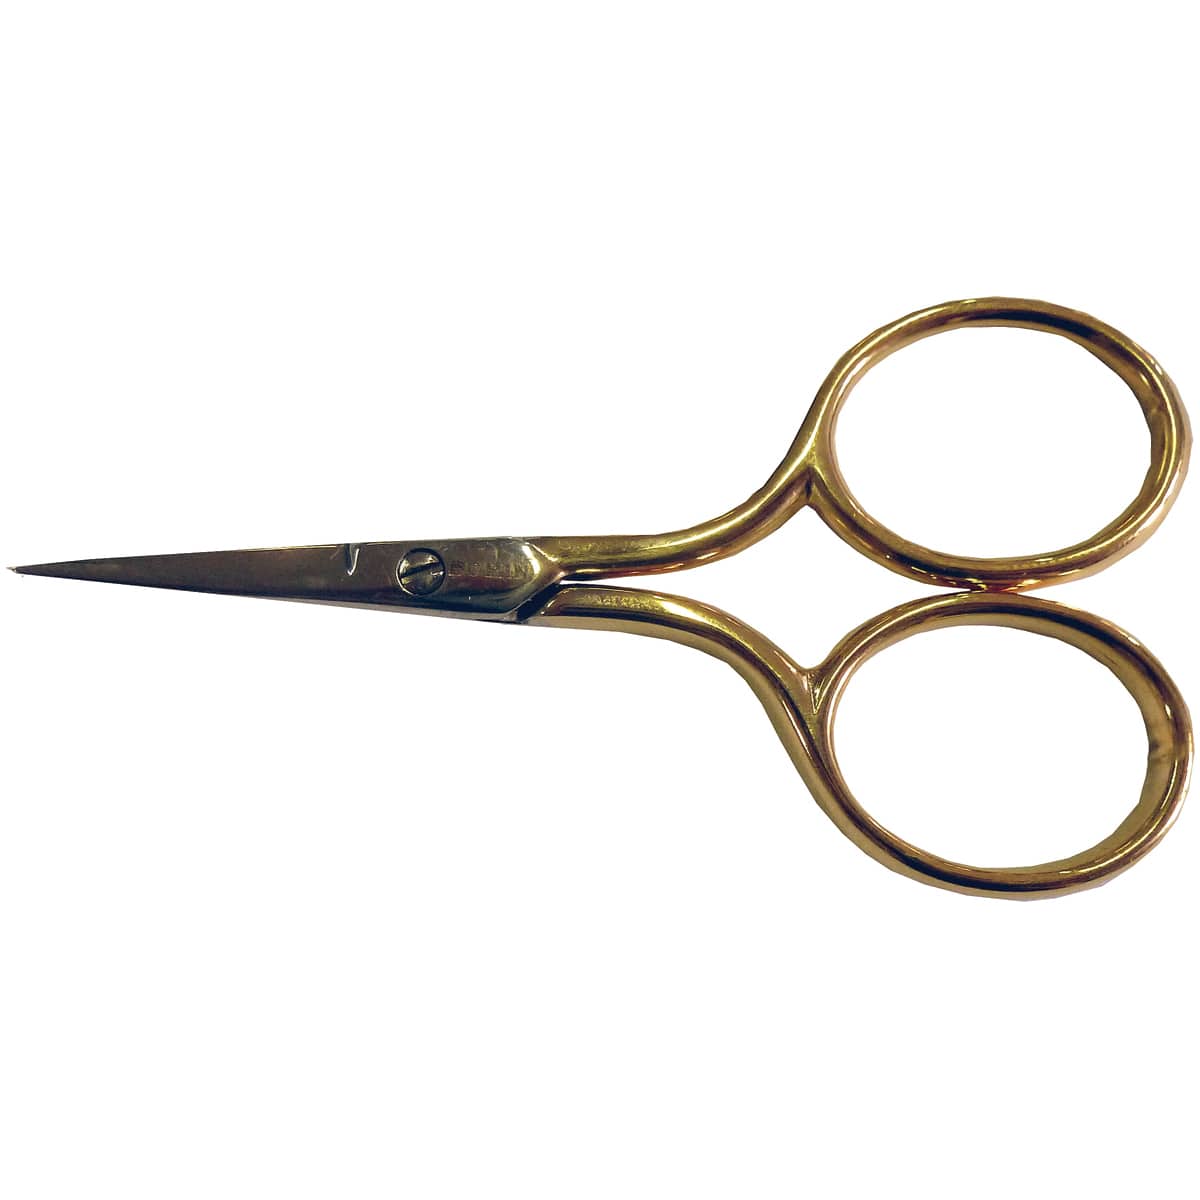 Tiny Snips Embroidery Scissors - Black/Gold 2.5